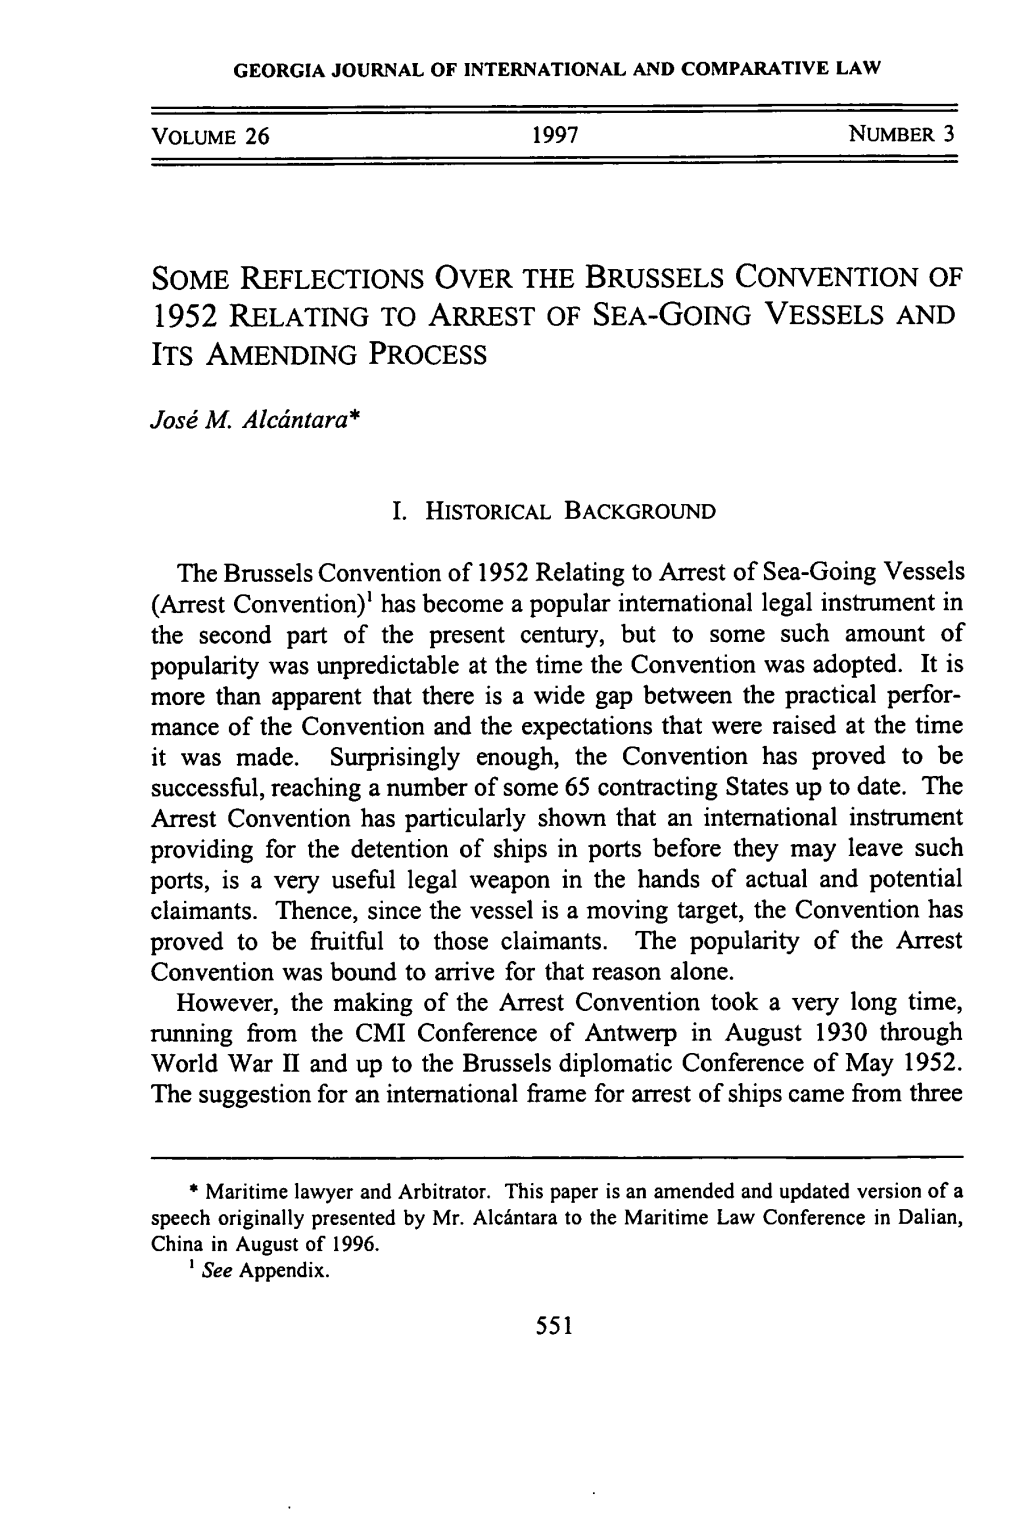 Some Reflections Over the Brussels Convention of 1952 Relating to Arrest of Sea-Going Vessels and Its Amending Process